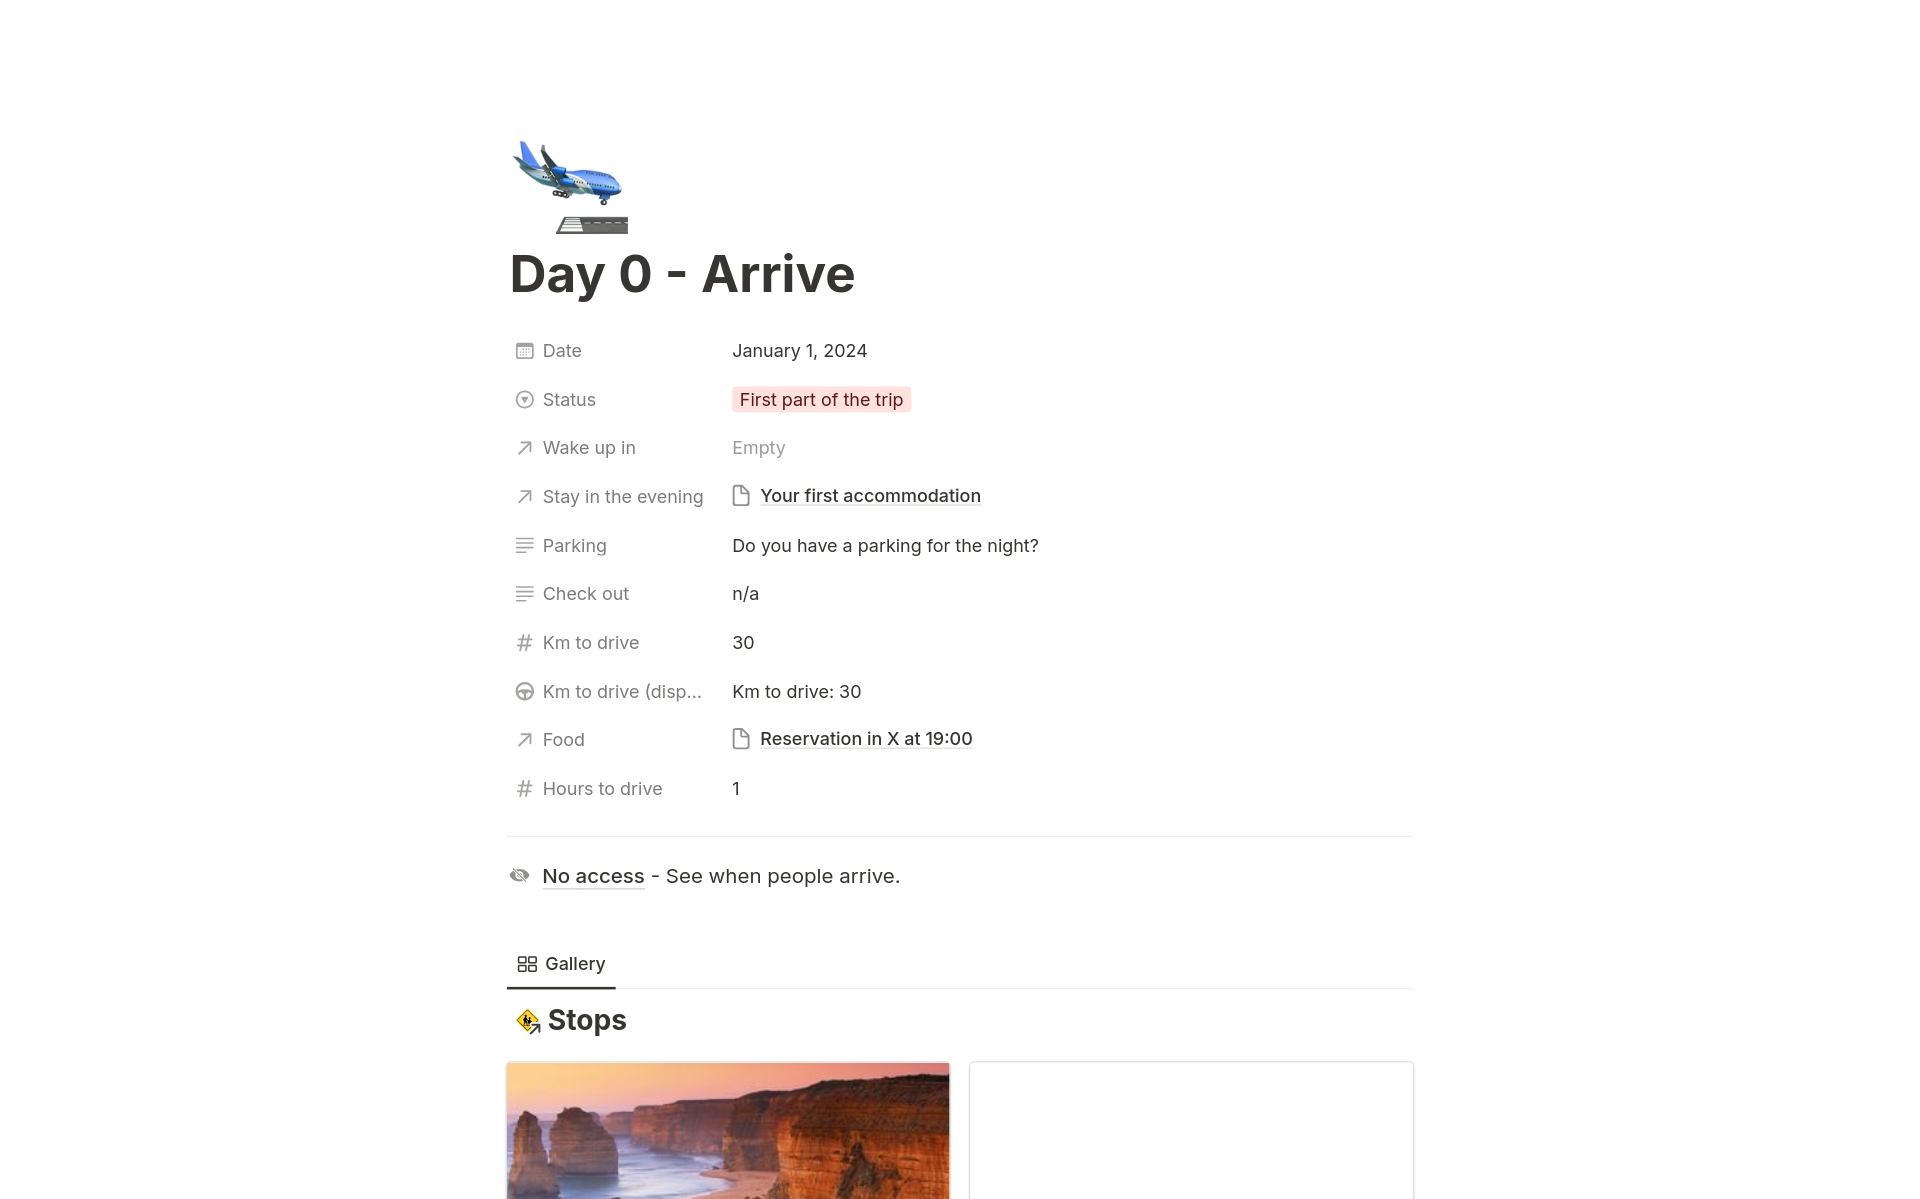 Day by day activities and stays planner with additional sections to plan a trip as a group.